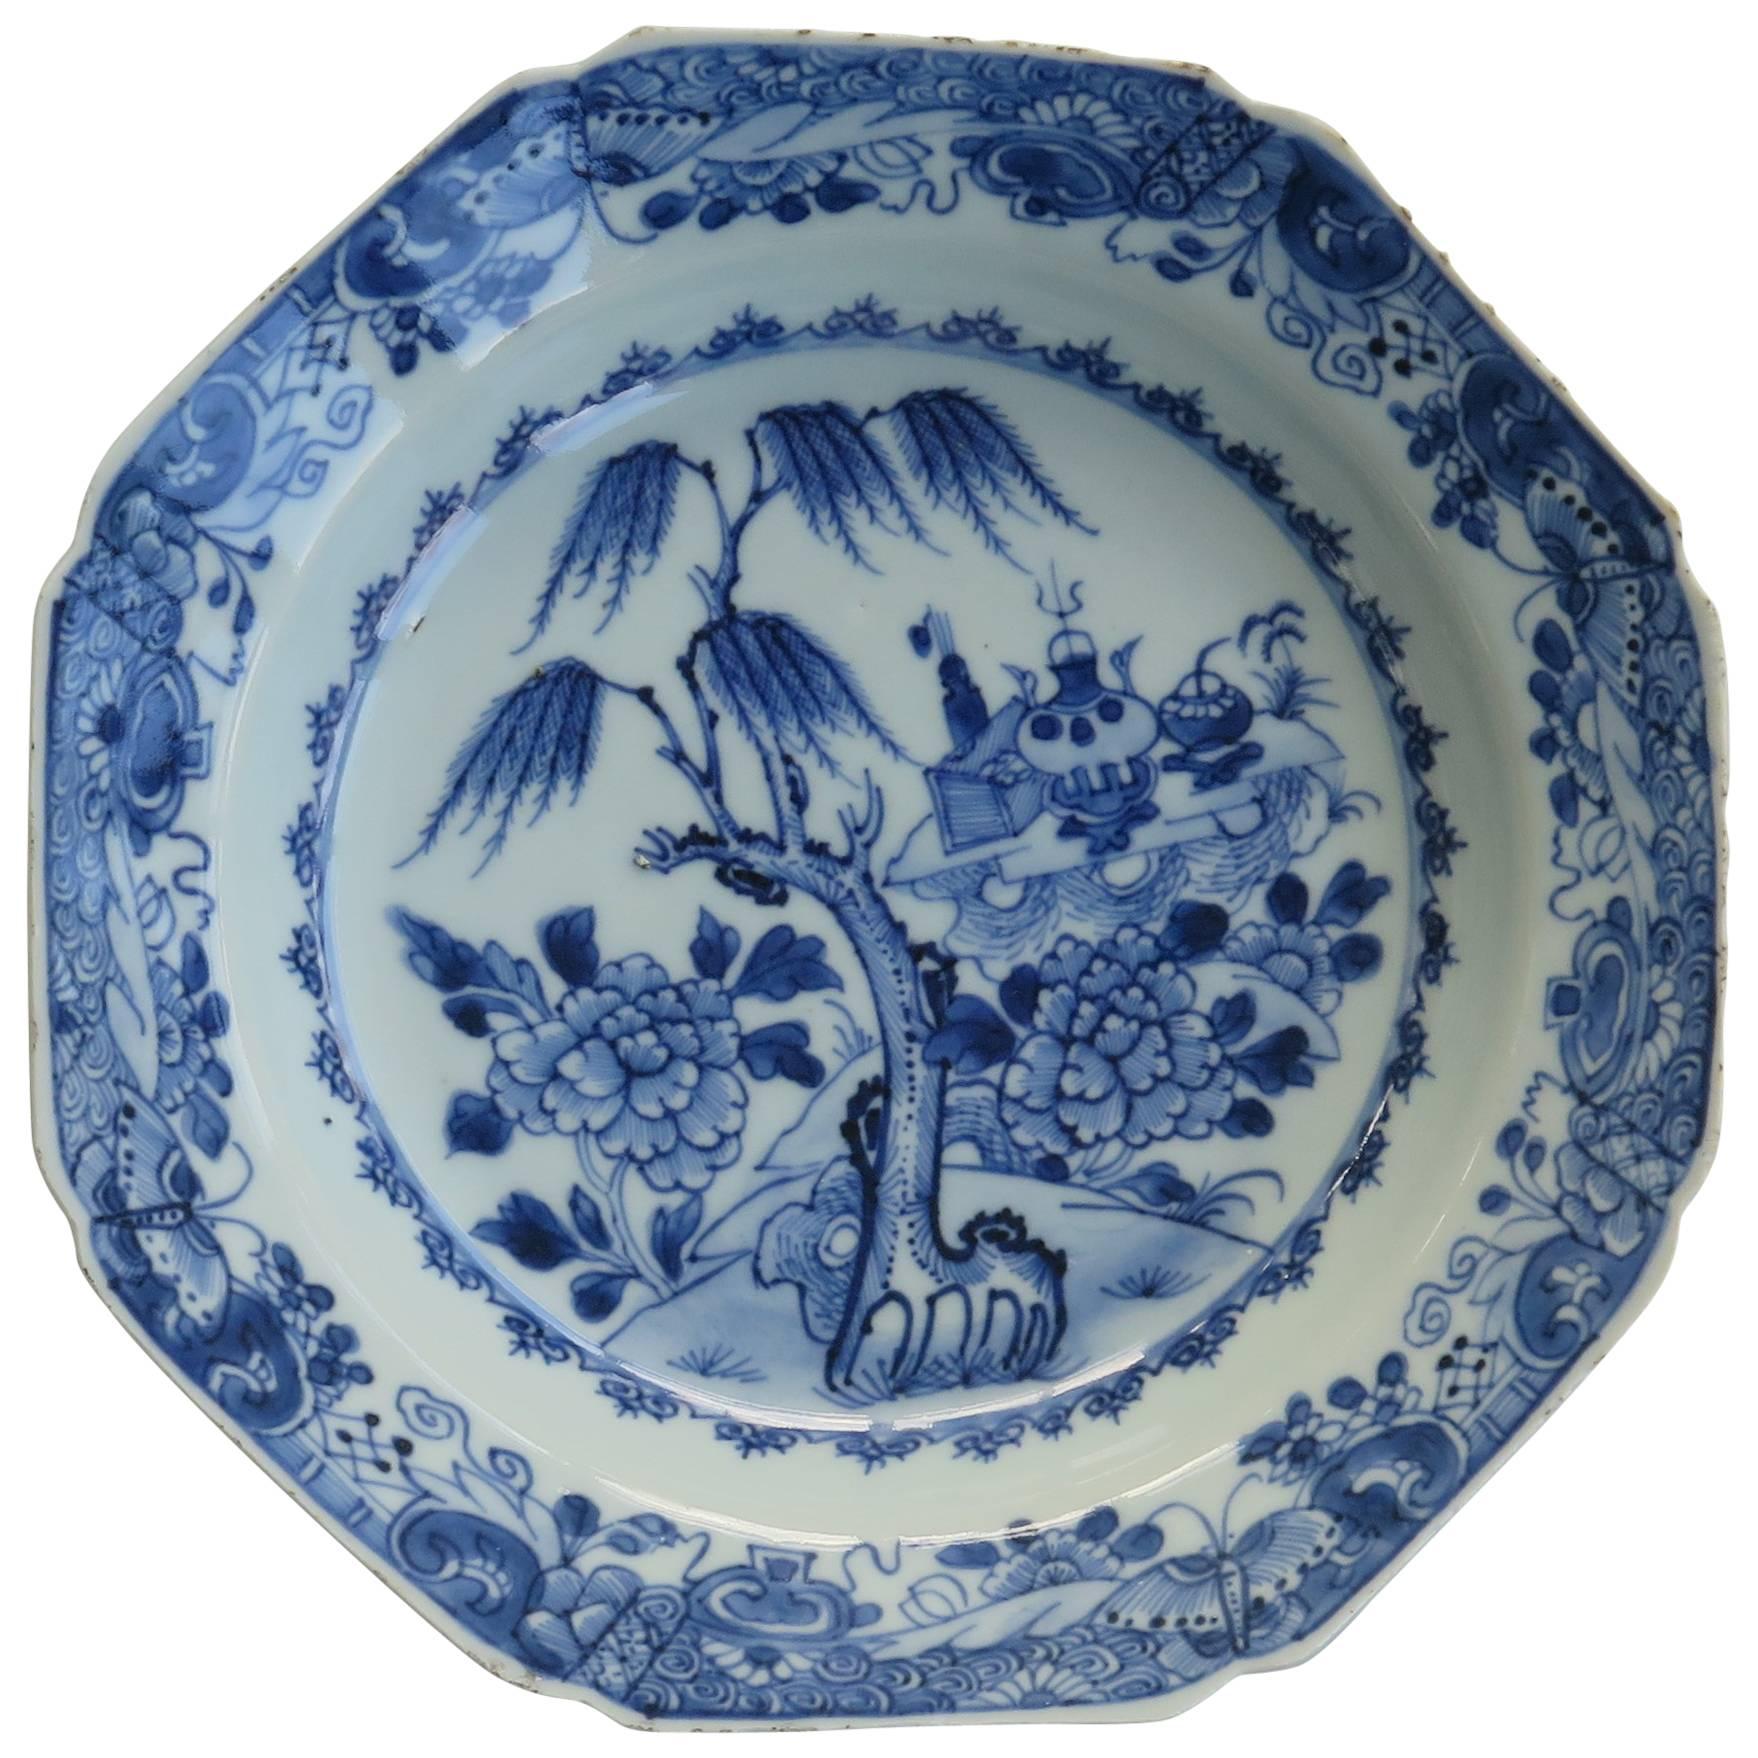 Chinese Export Soup Plate, Canton, Blue and White Porcelain, Qing, circa 1780